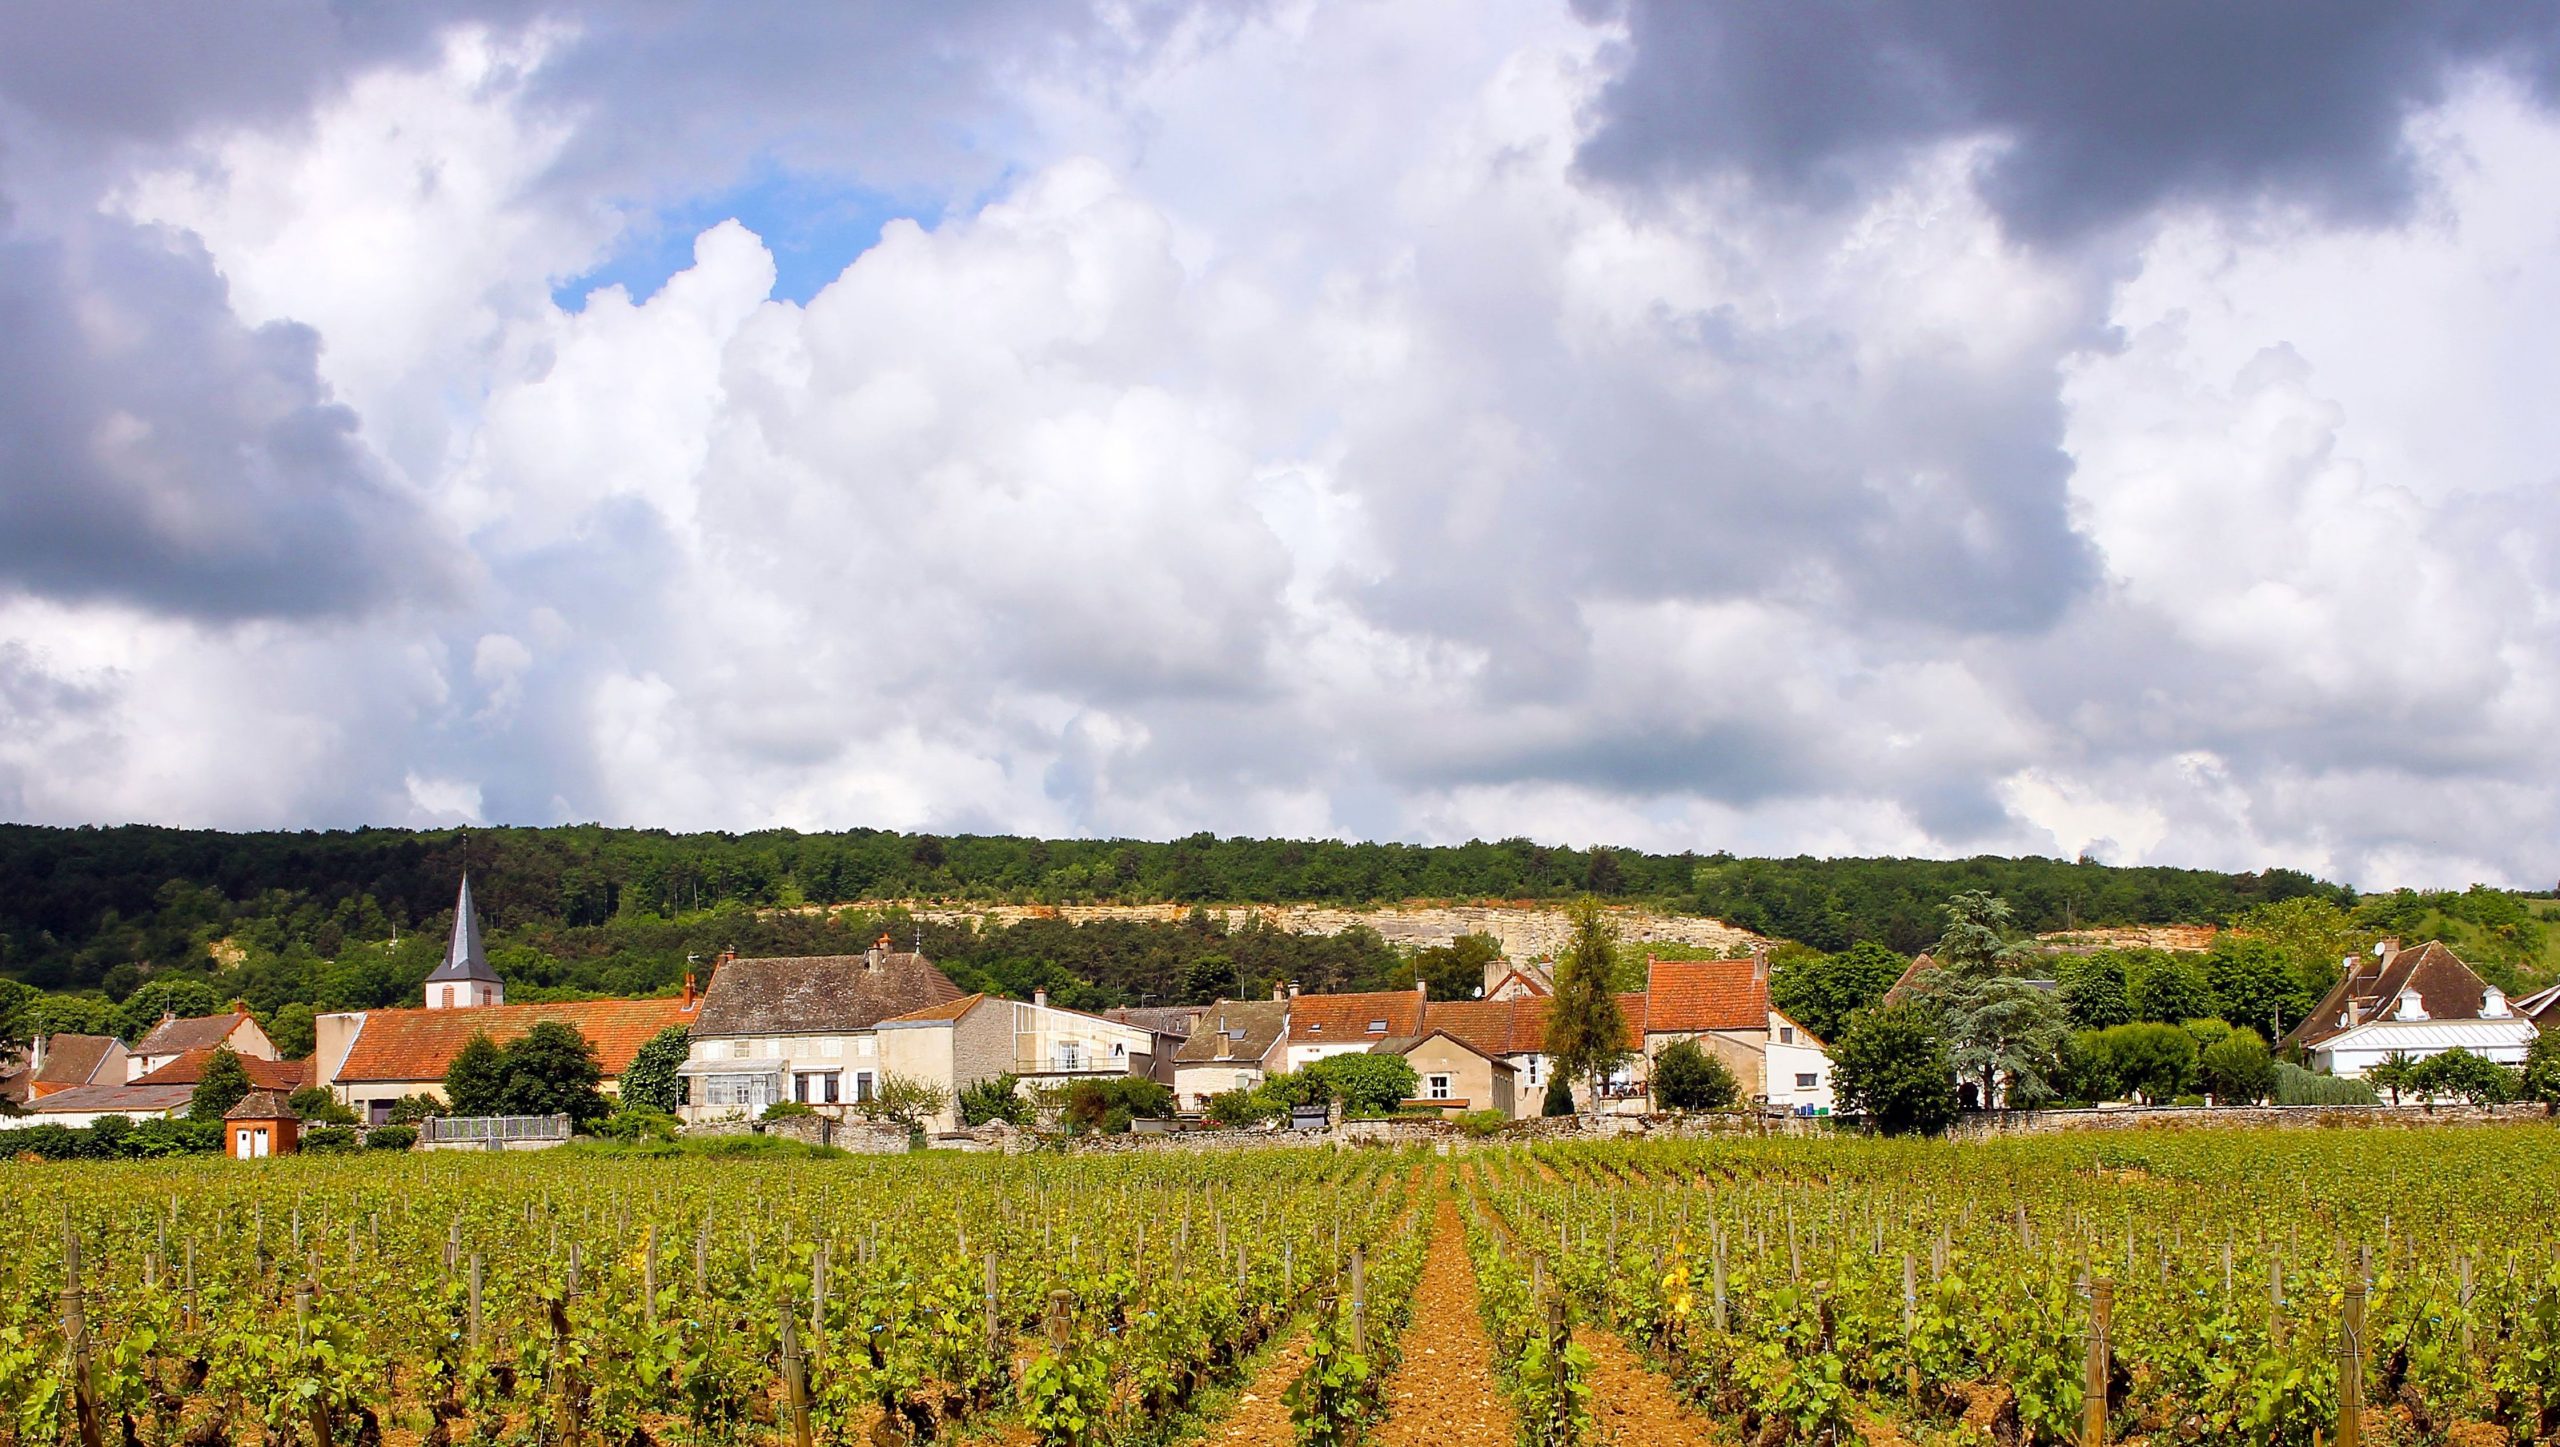 Burgundy is one of the most loved wine regions and for good reason ...